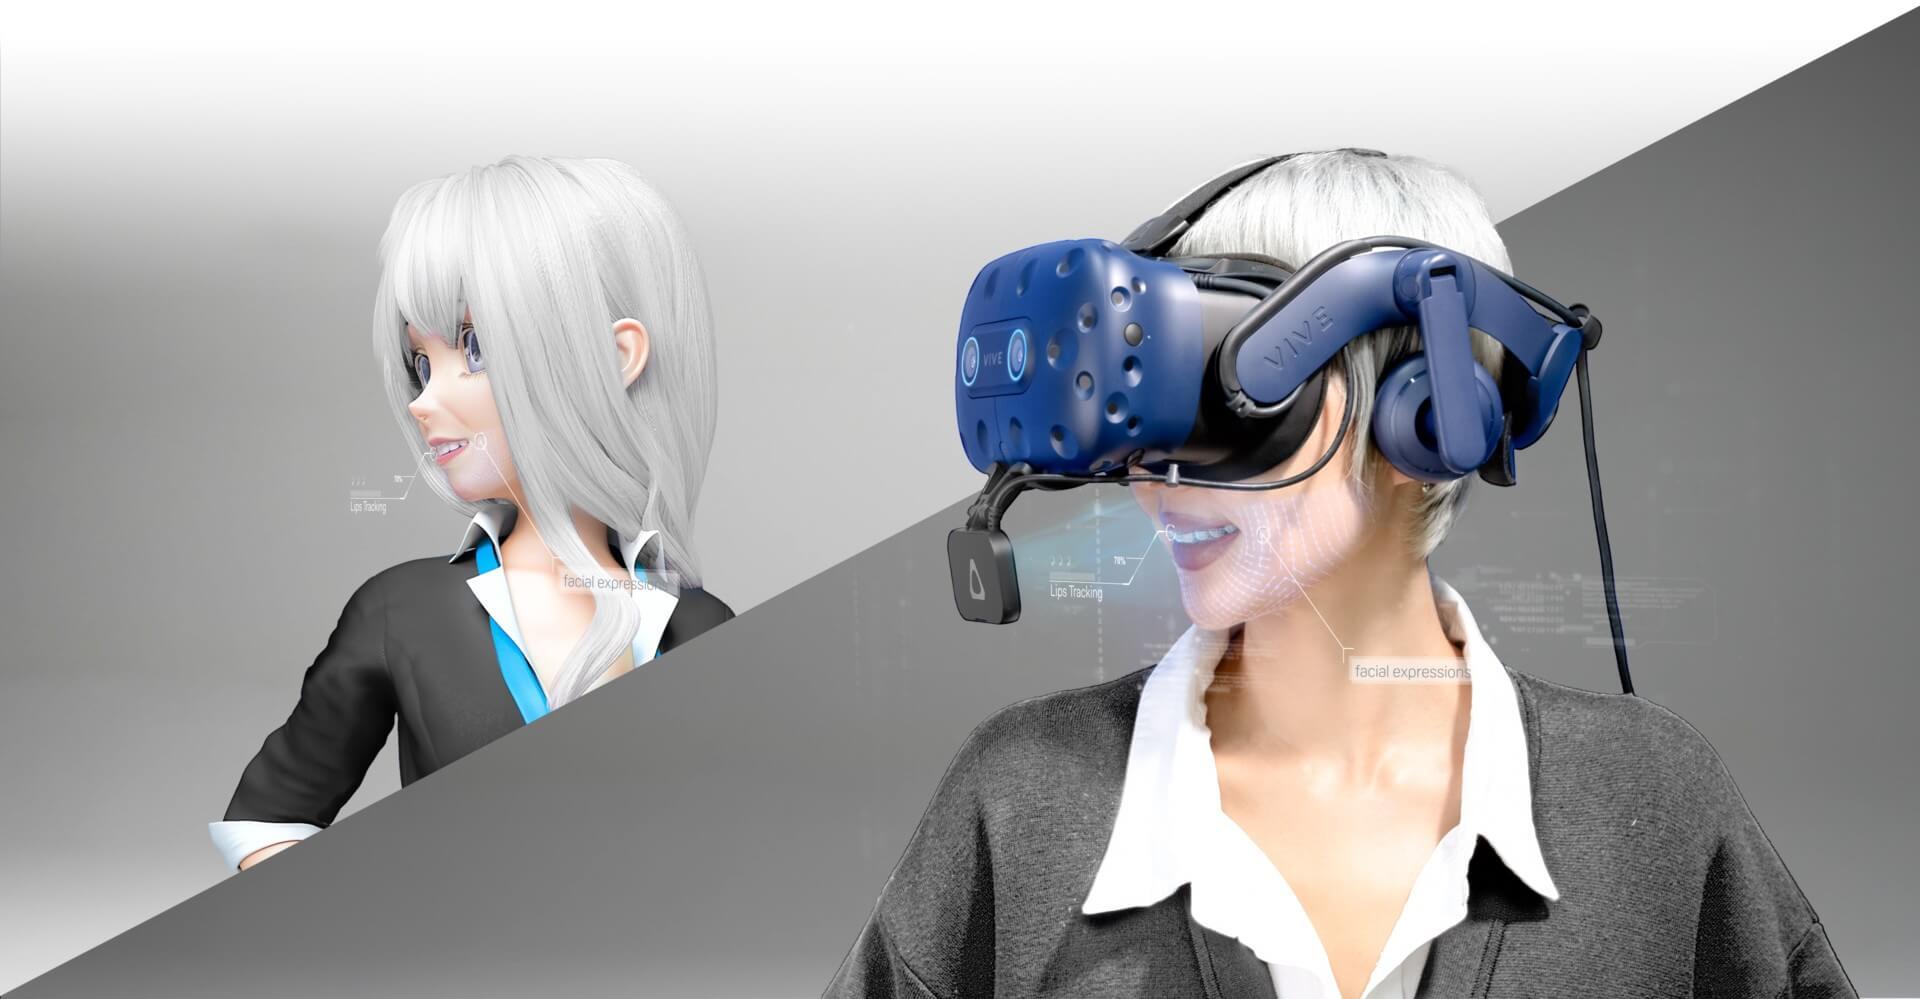 htc vive facial tracker being worn